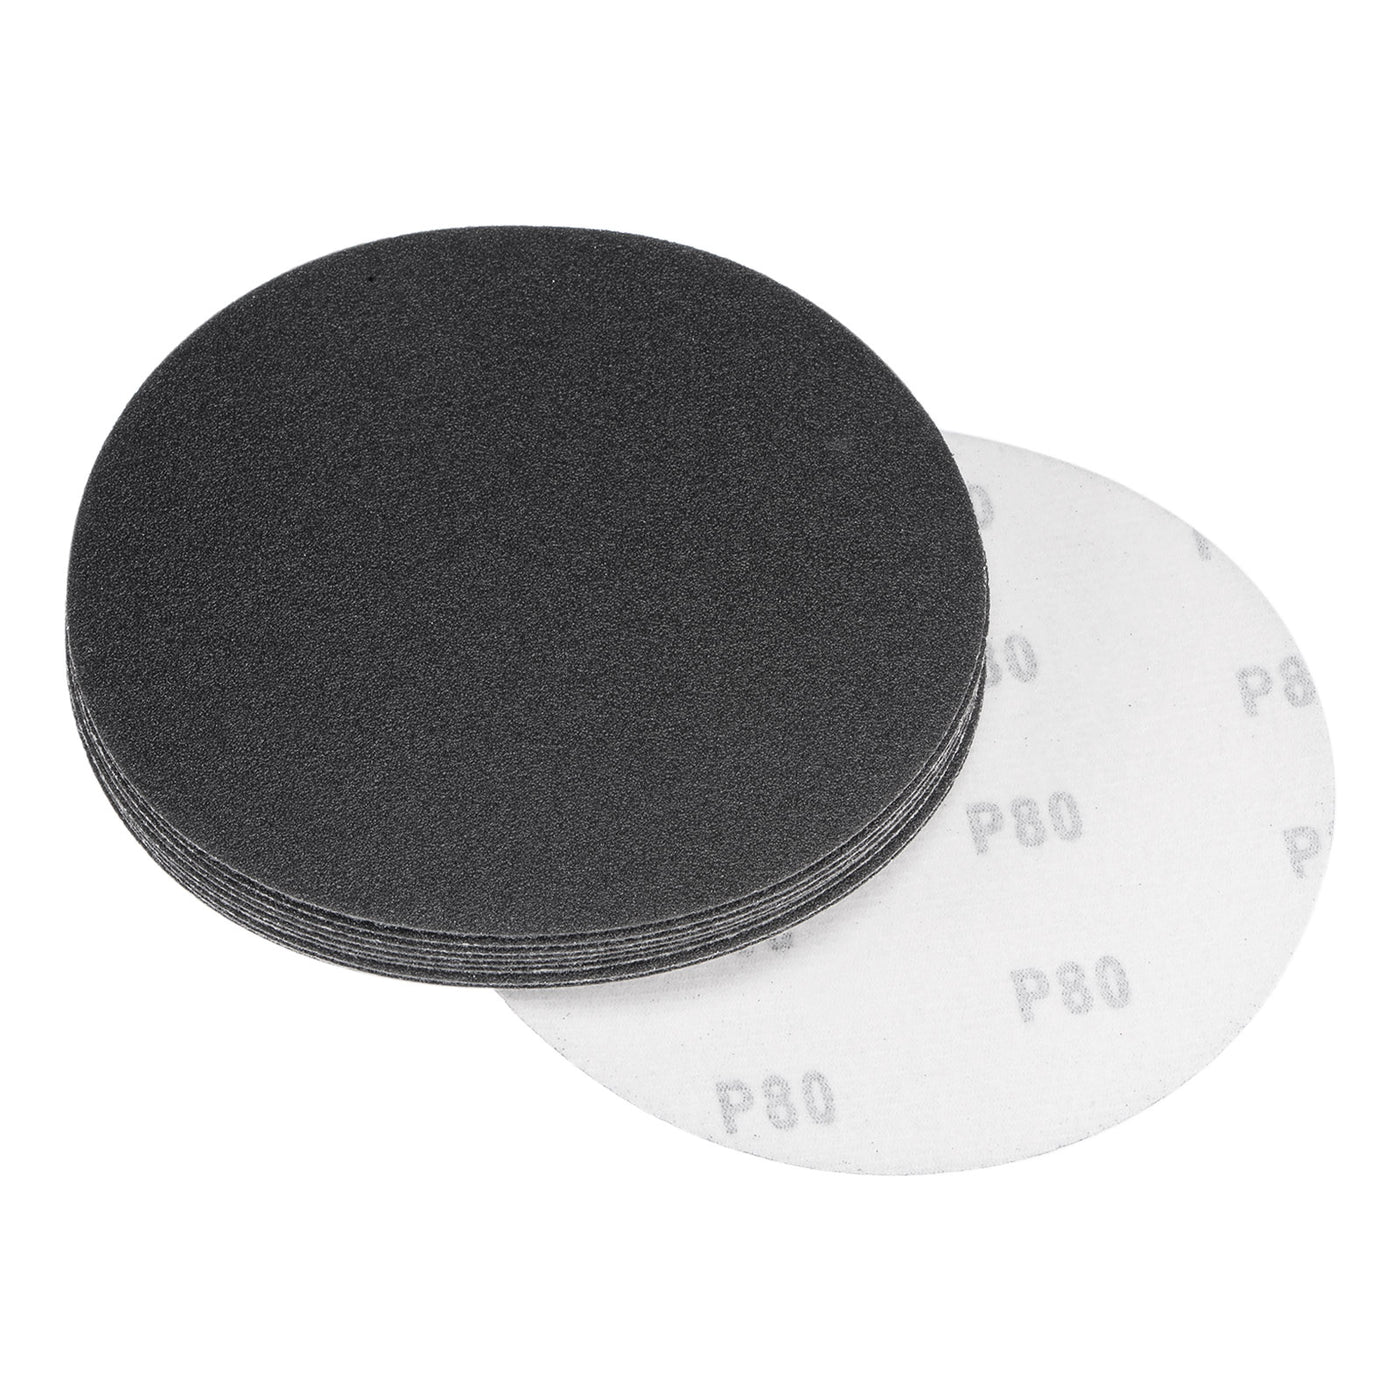 Uxcell Uxcell 6 Inch Sanding Disc 180Grit Hook and Loop Silicon Carbide C-Weight Backing 10Pcs